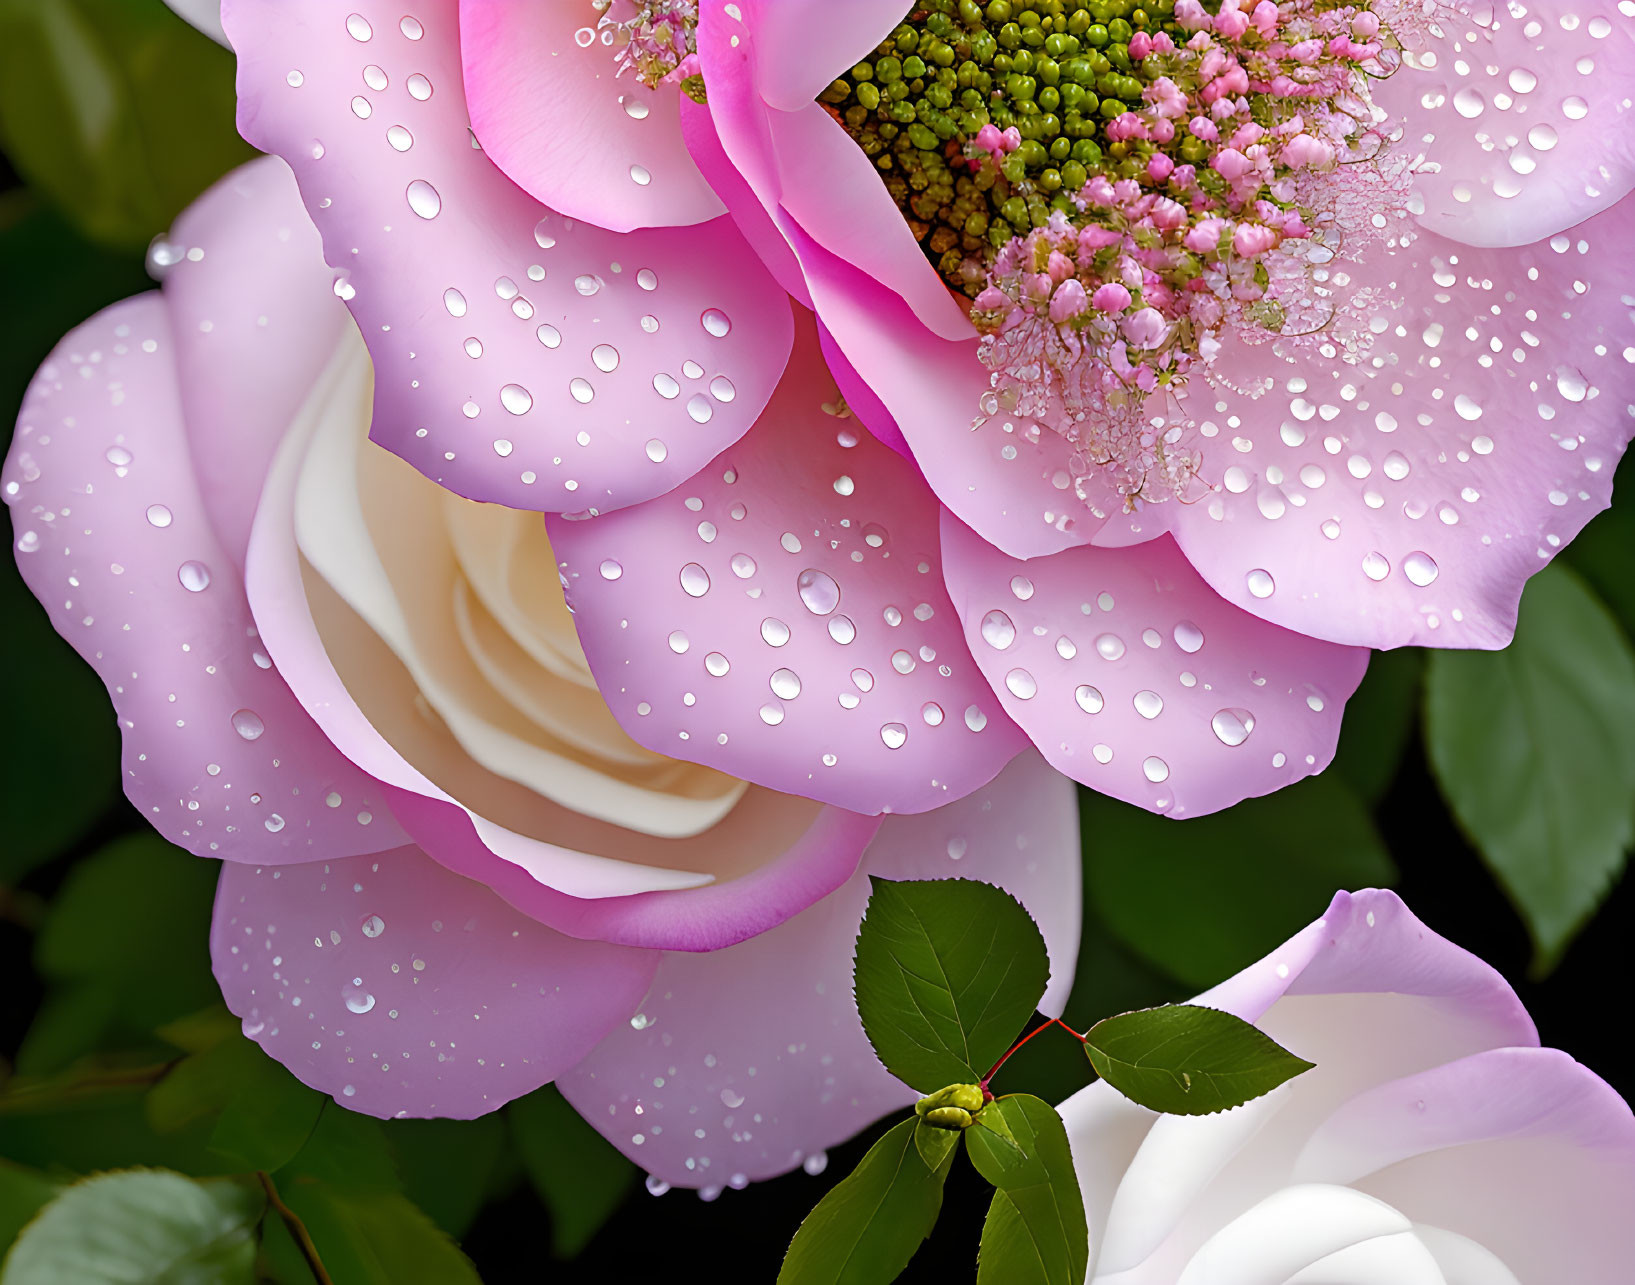 Pink rose with water droplets and tiny pink flowers and leaves close-up